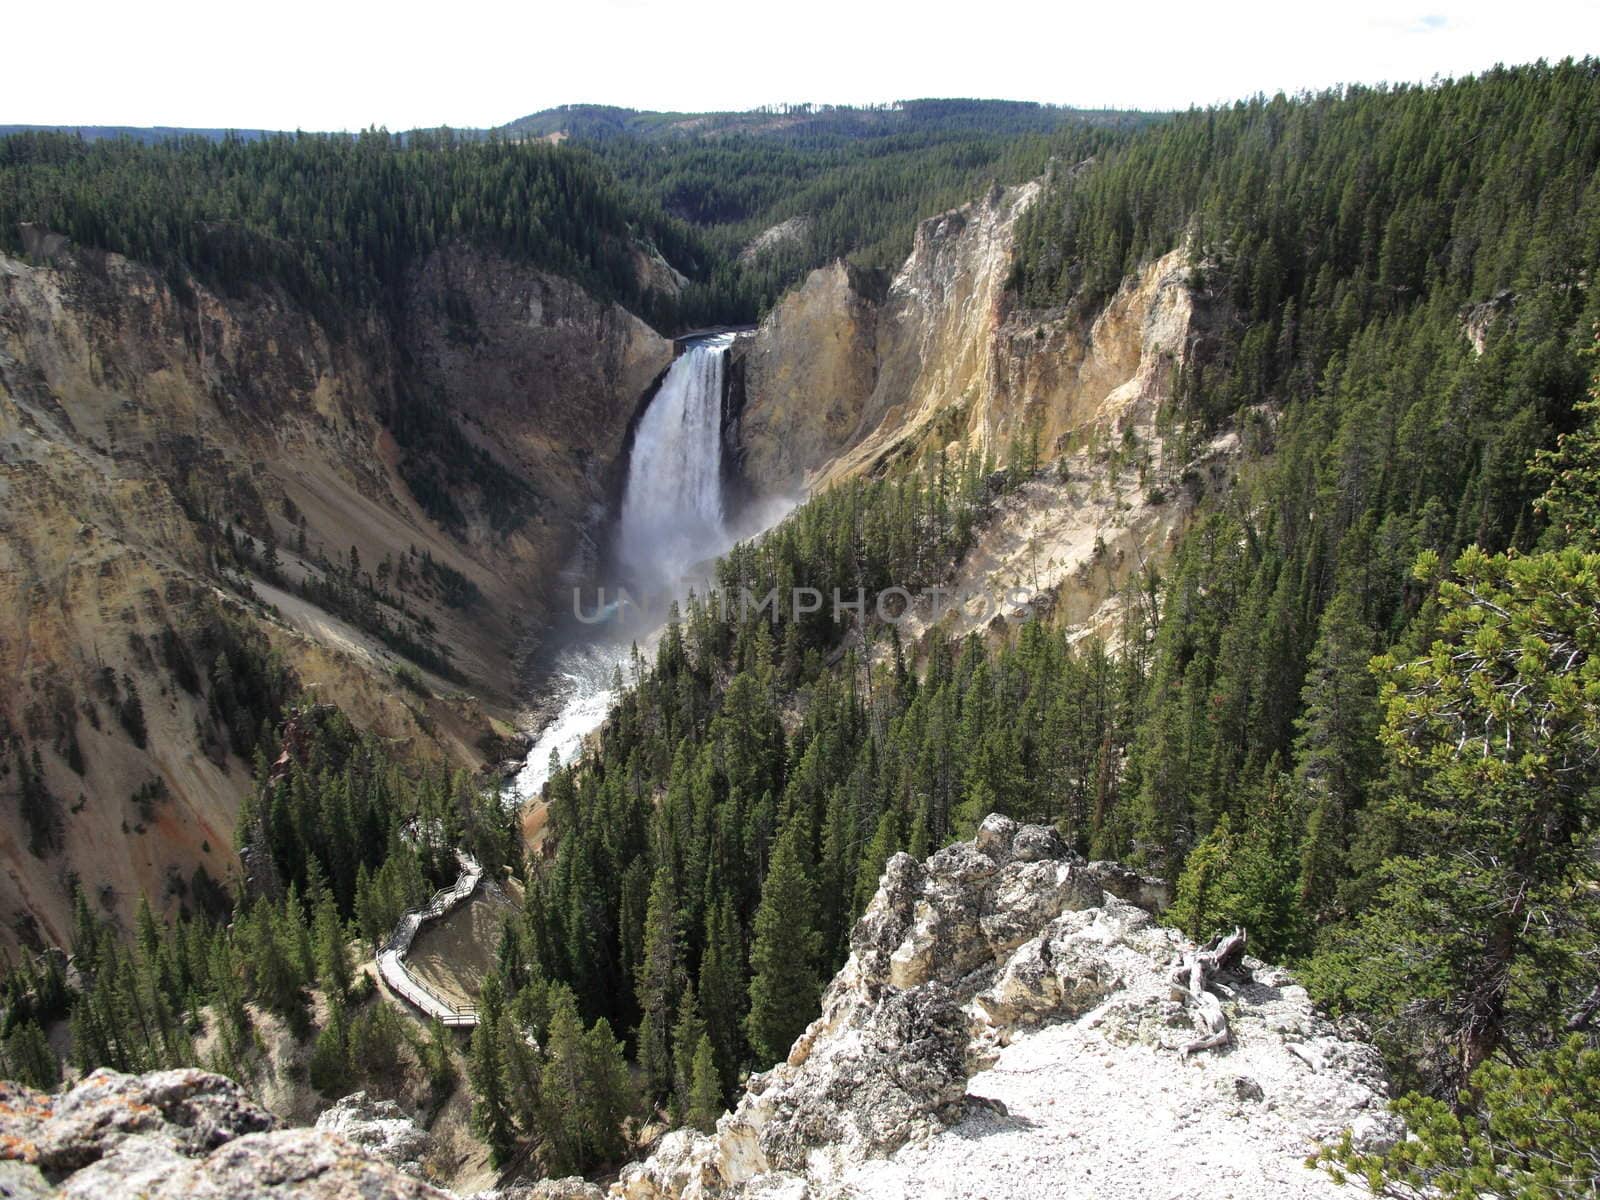 Golden cliffs and towering waterfall highlight the Grand Canyon of Yellowstone